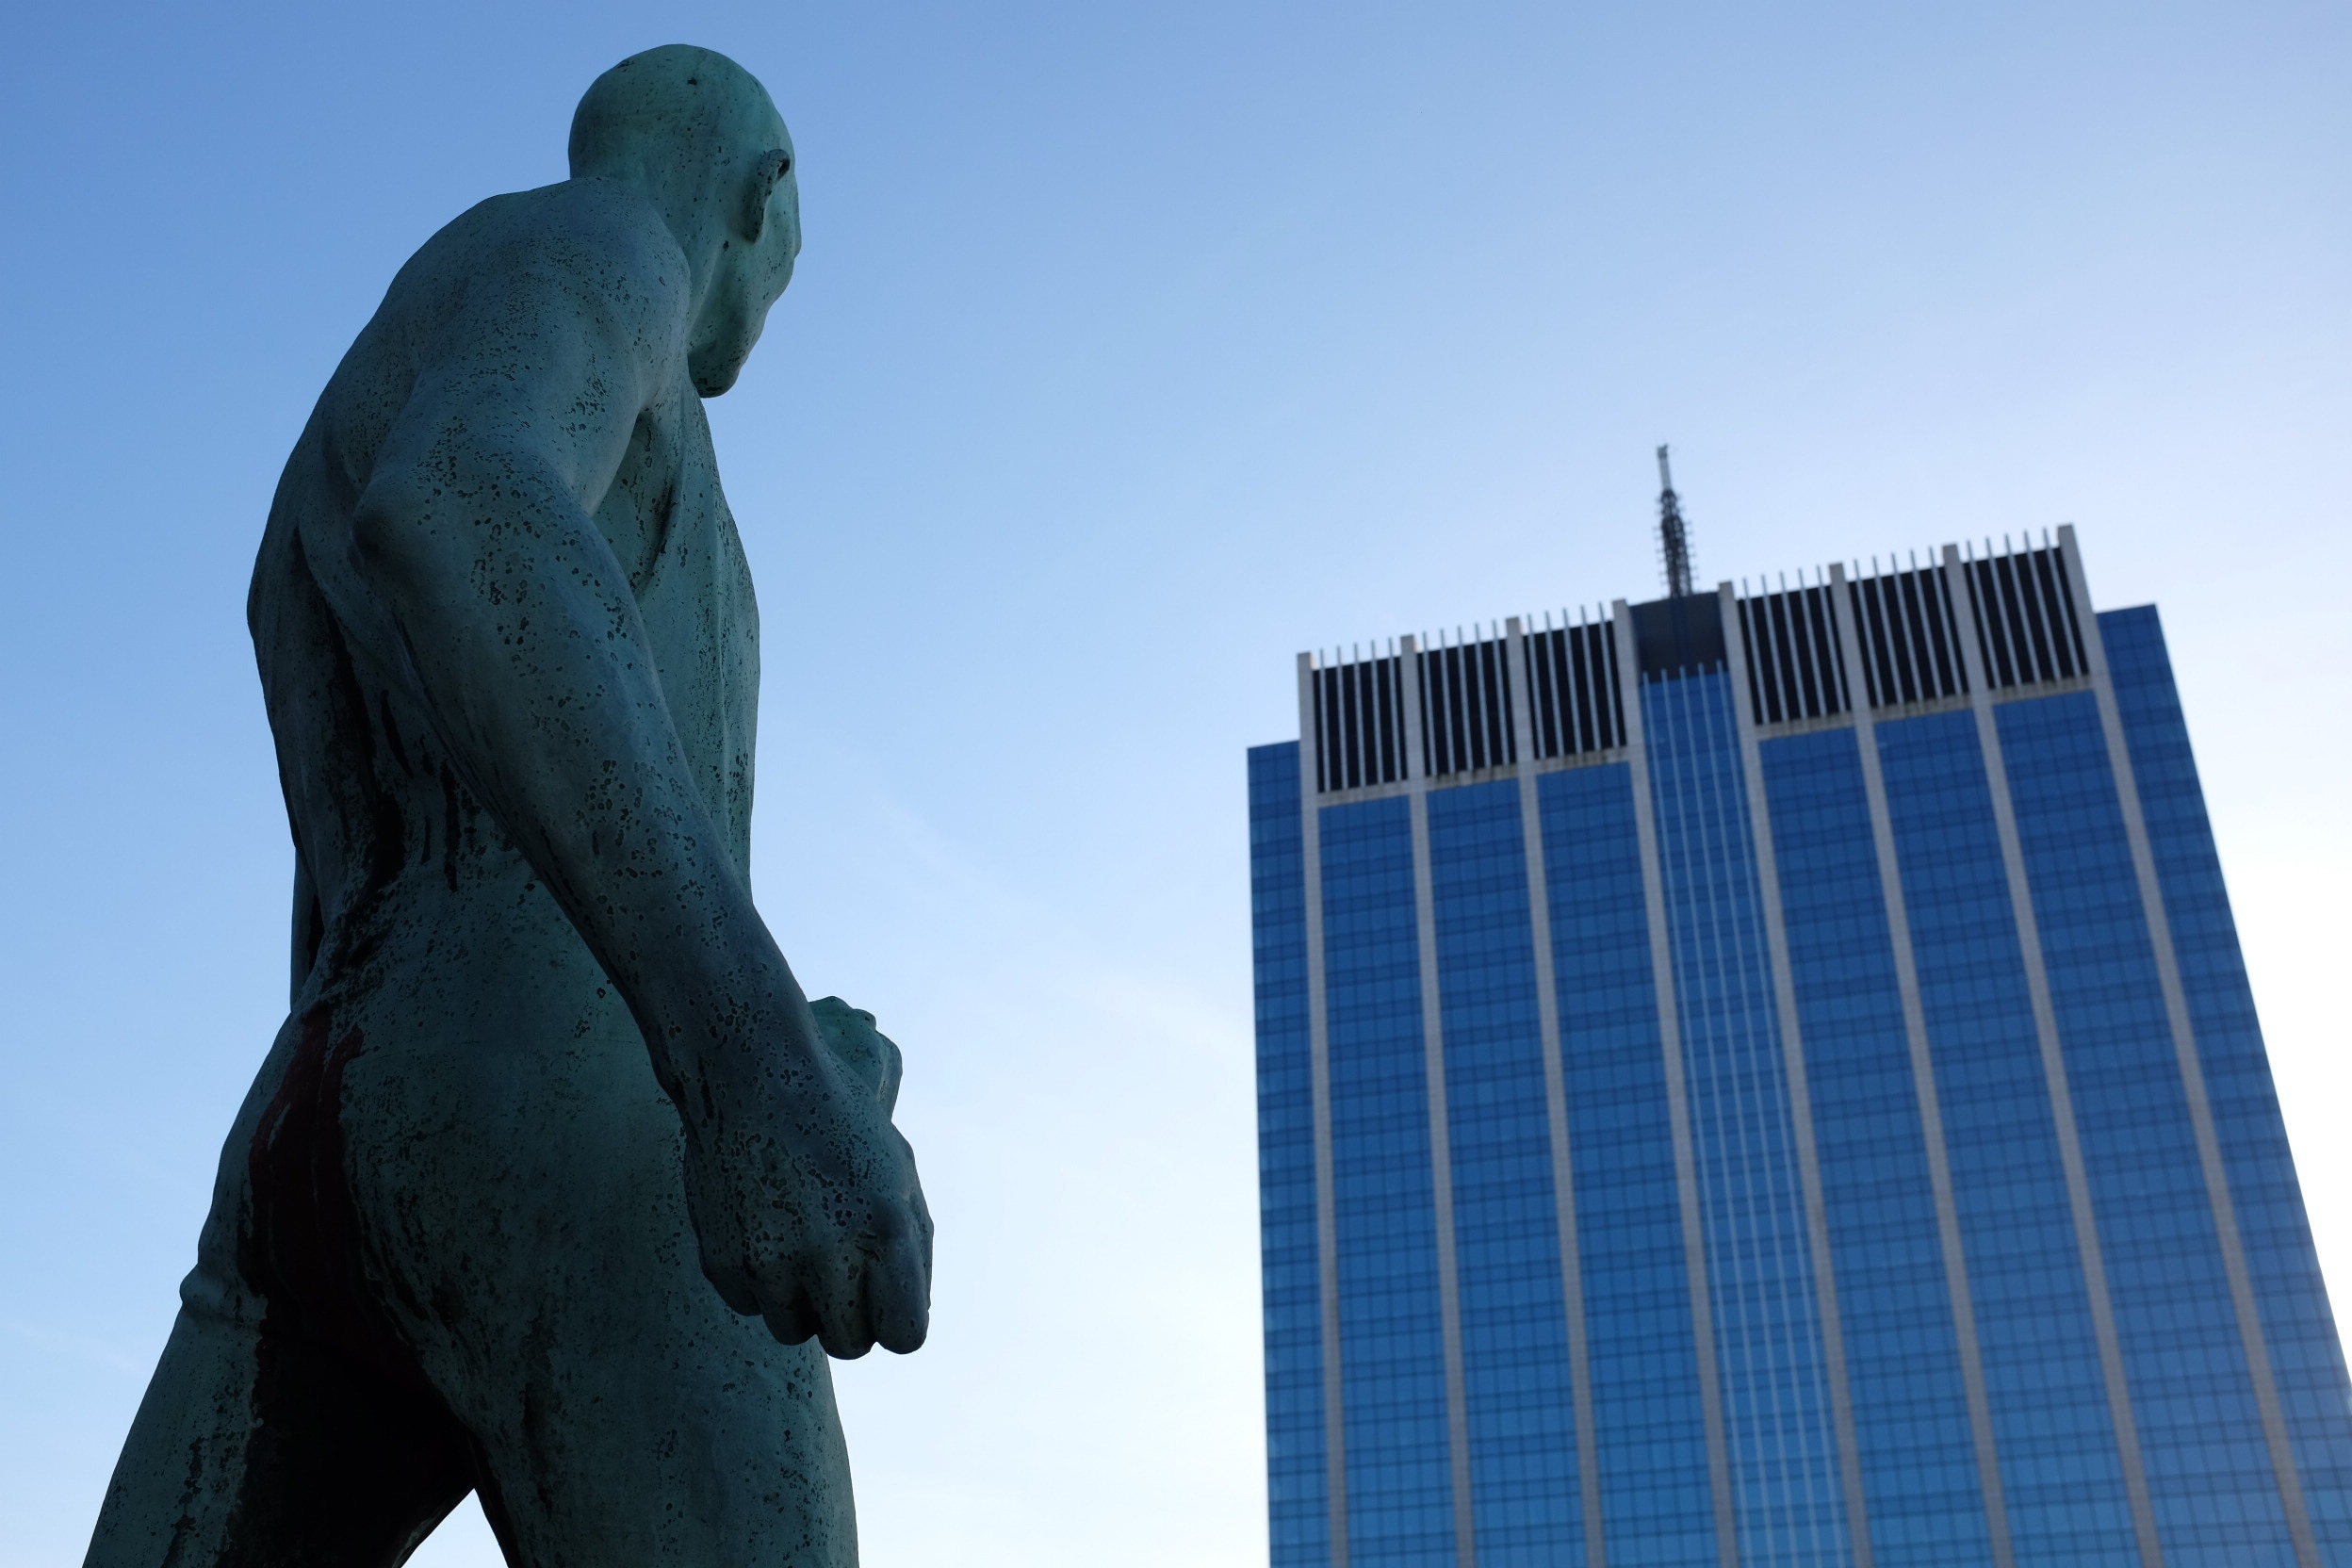 photography of man statue and blue building